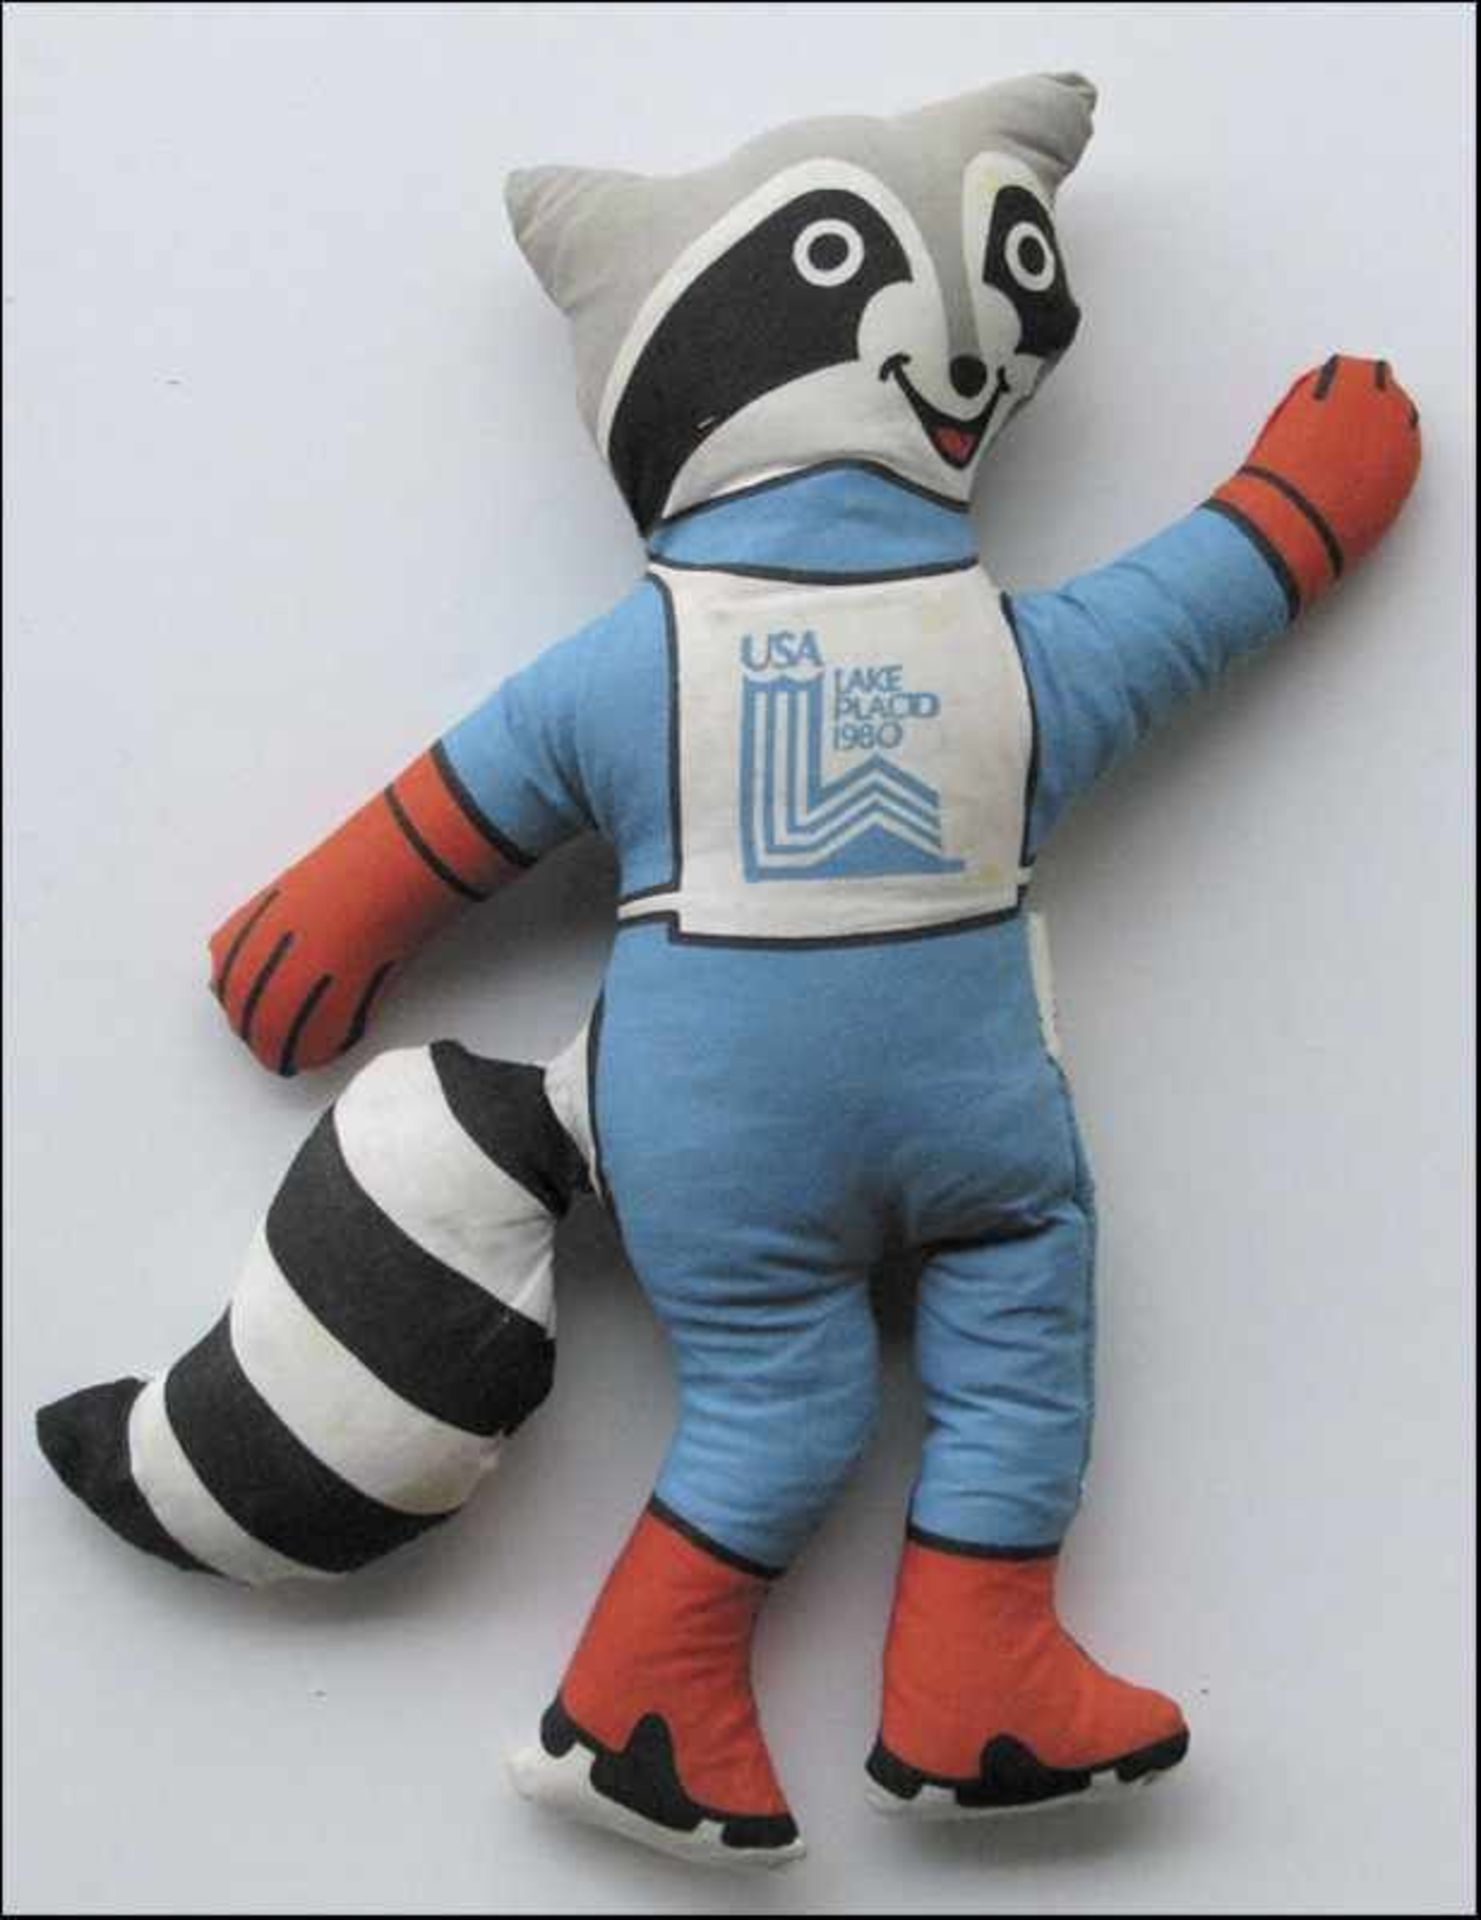 Olympic Games Lake Placid 1980. Official Mascot - "Rony". Cuddly toy. Size: 35 cm. Very rare!